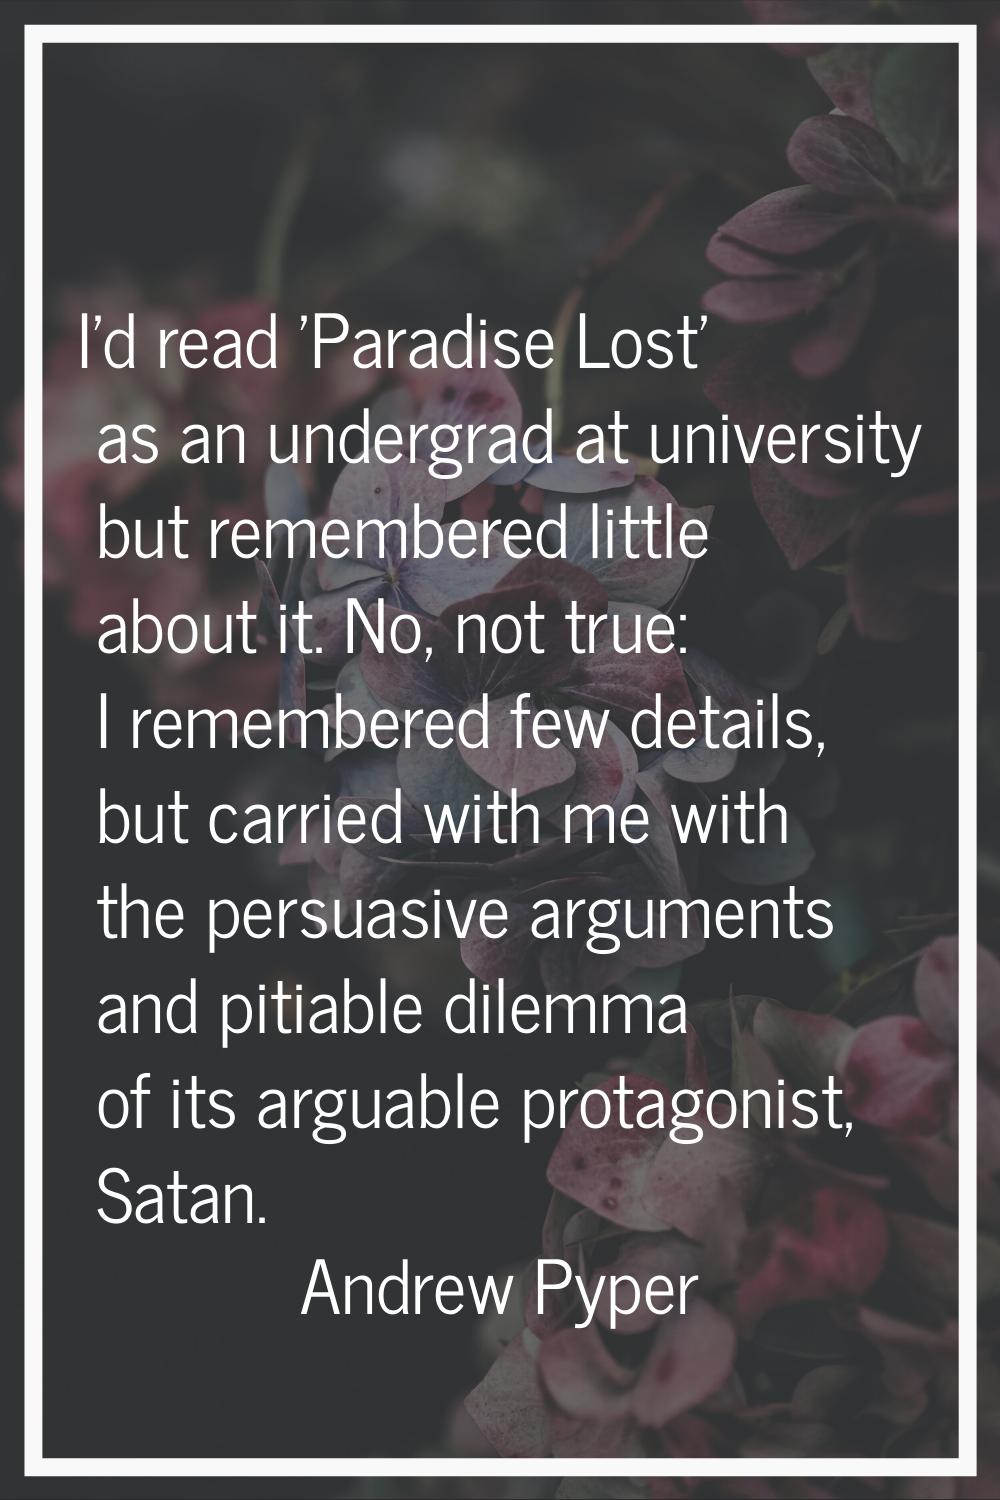 I'd read 'Paradise Lost' as an undergrad at university but remembered little about it. No, not true